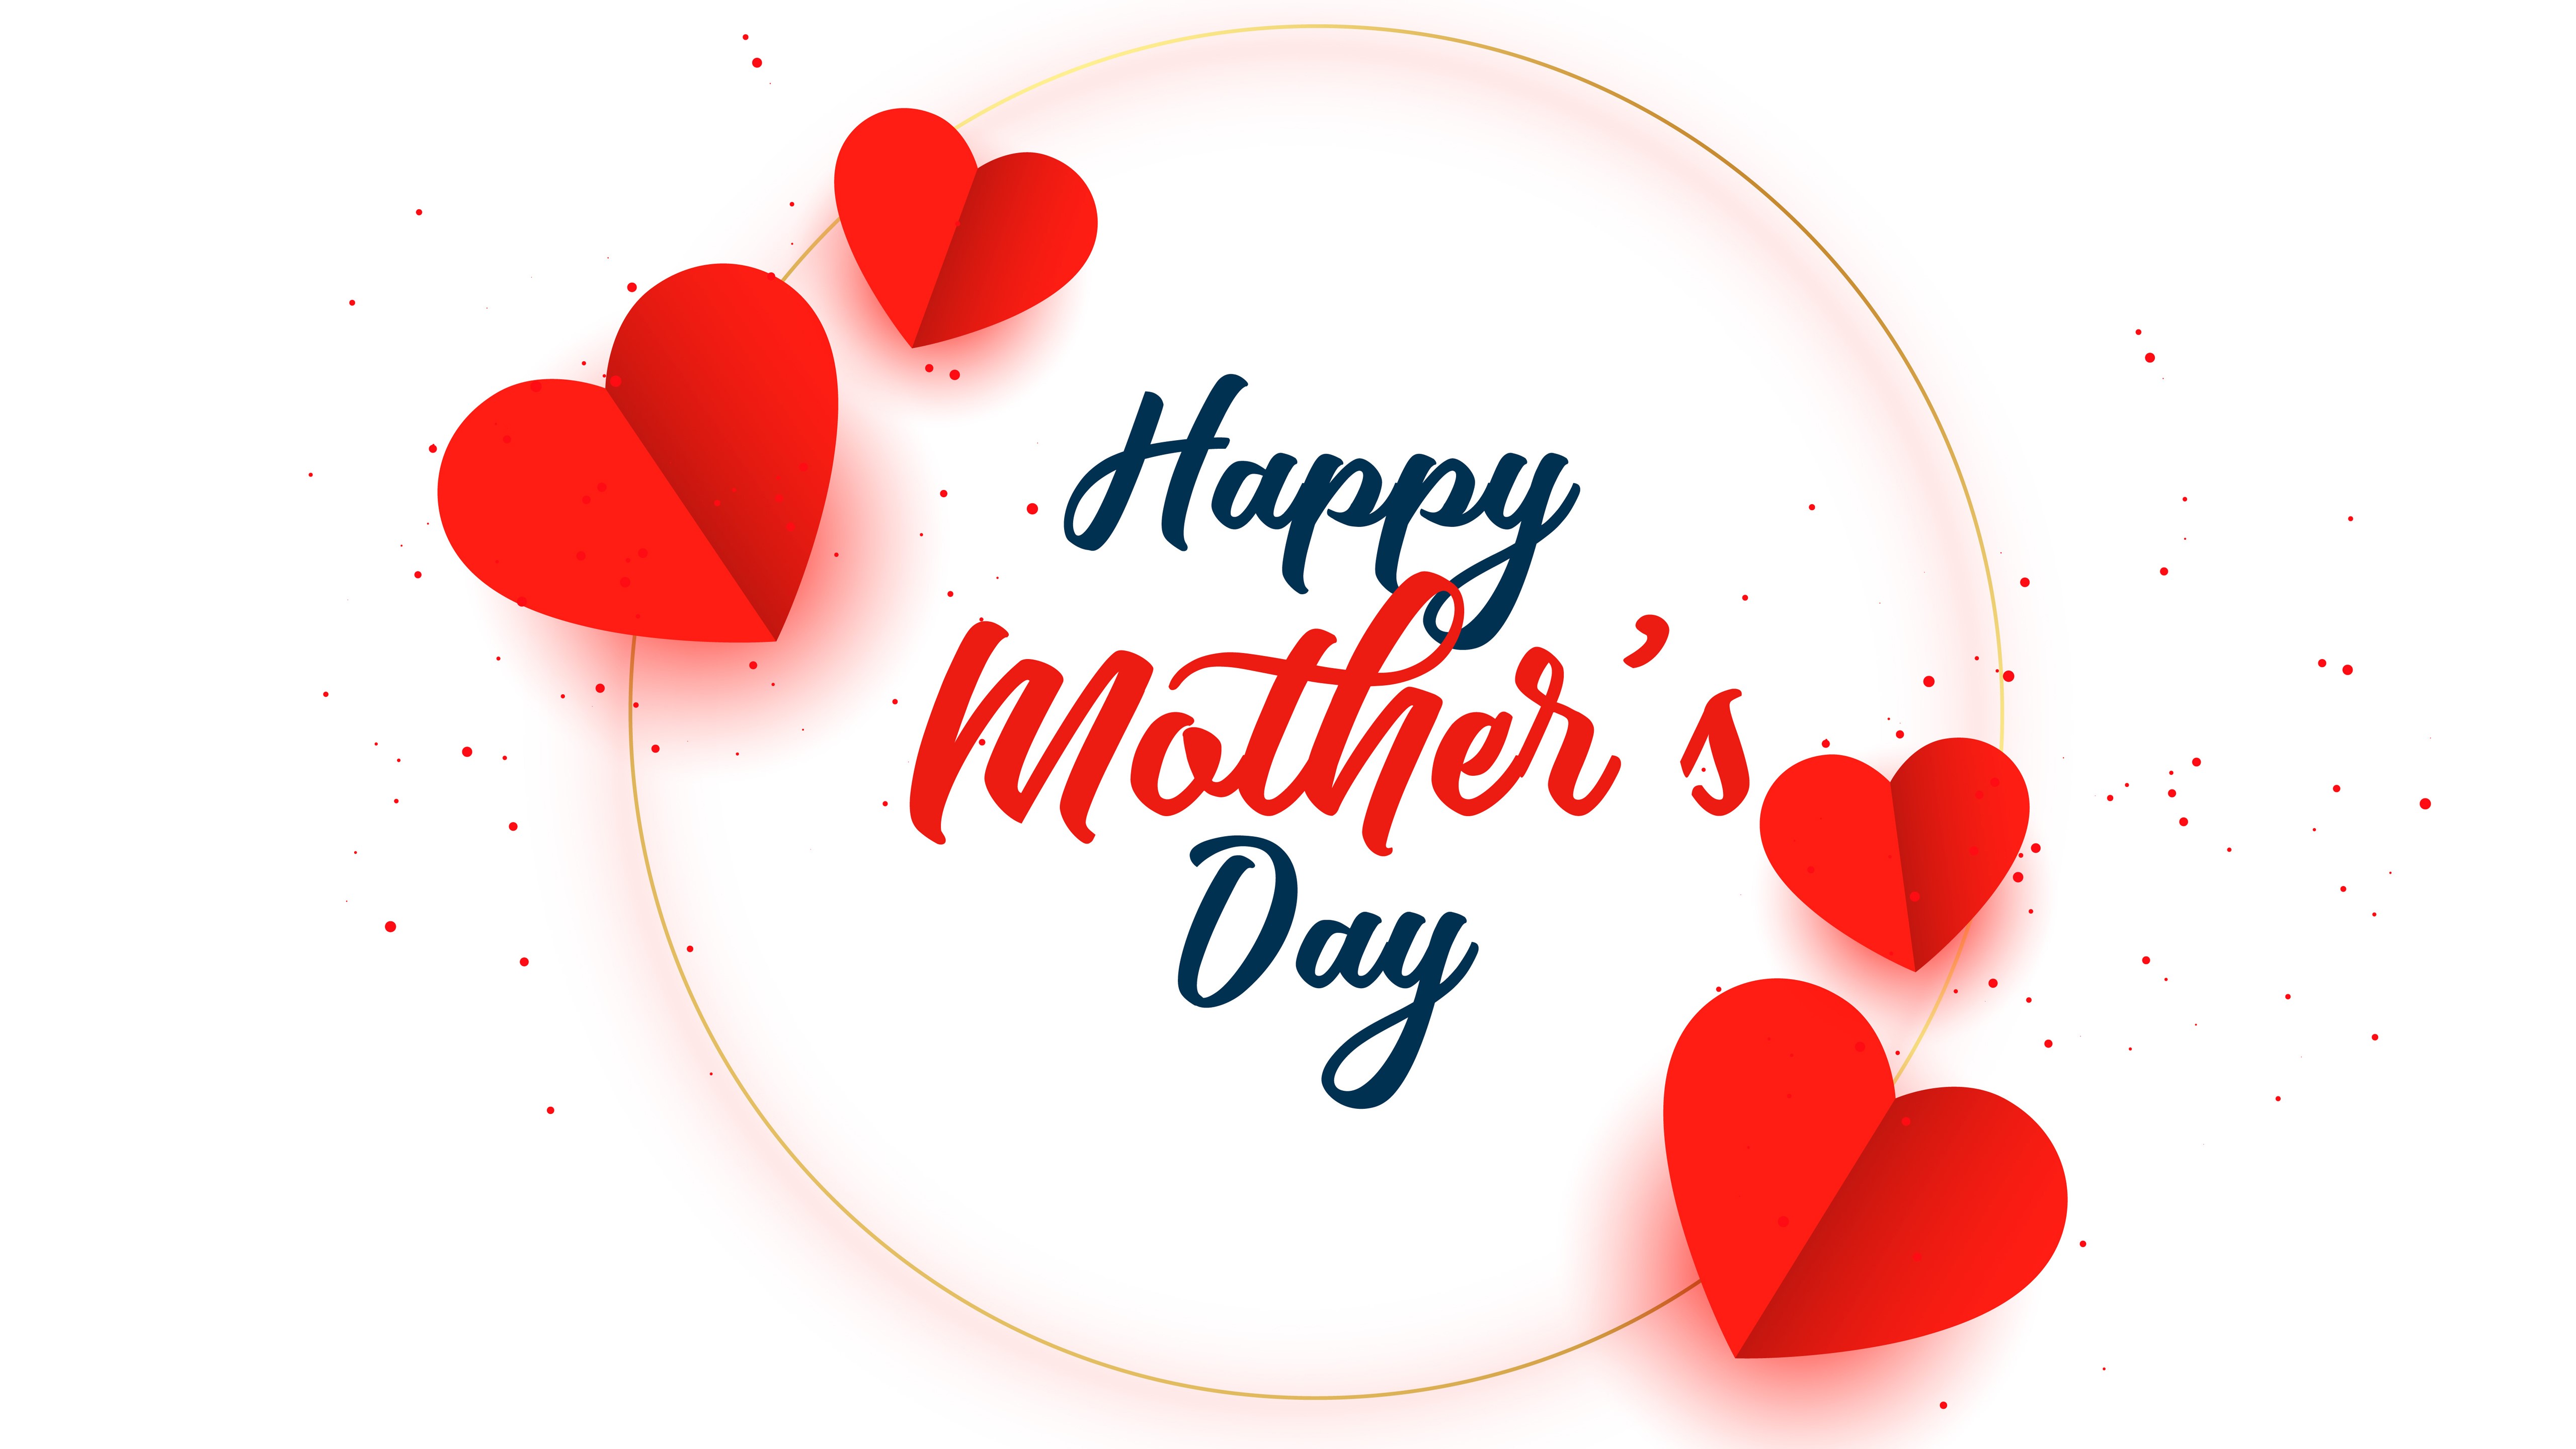 Happy Mothers Day Wallpaper With Heart Bubble - Dwonload Mother Day Images Download , HD Wallpaper & Backgrounds